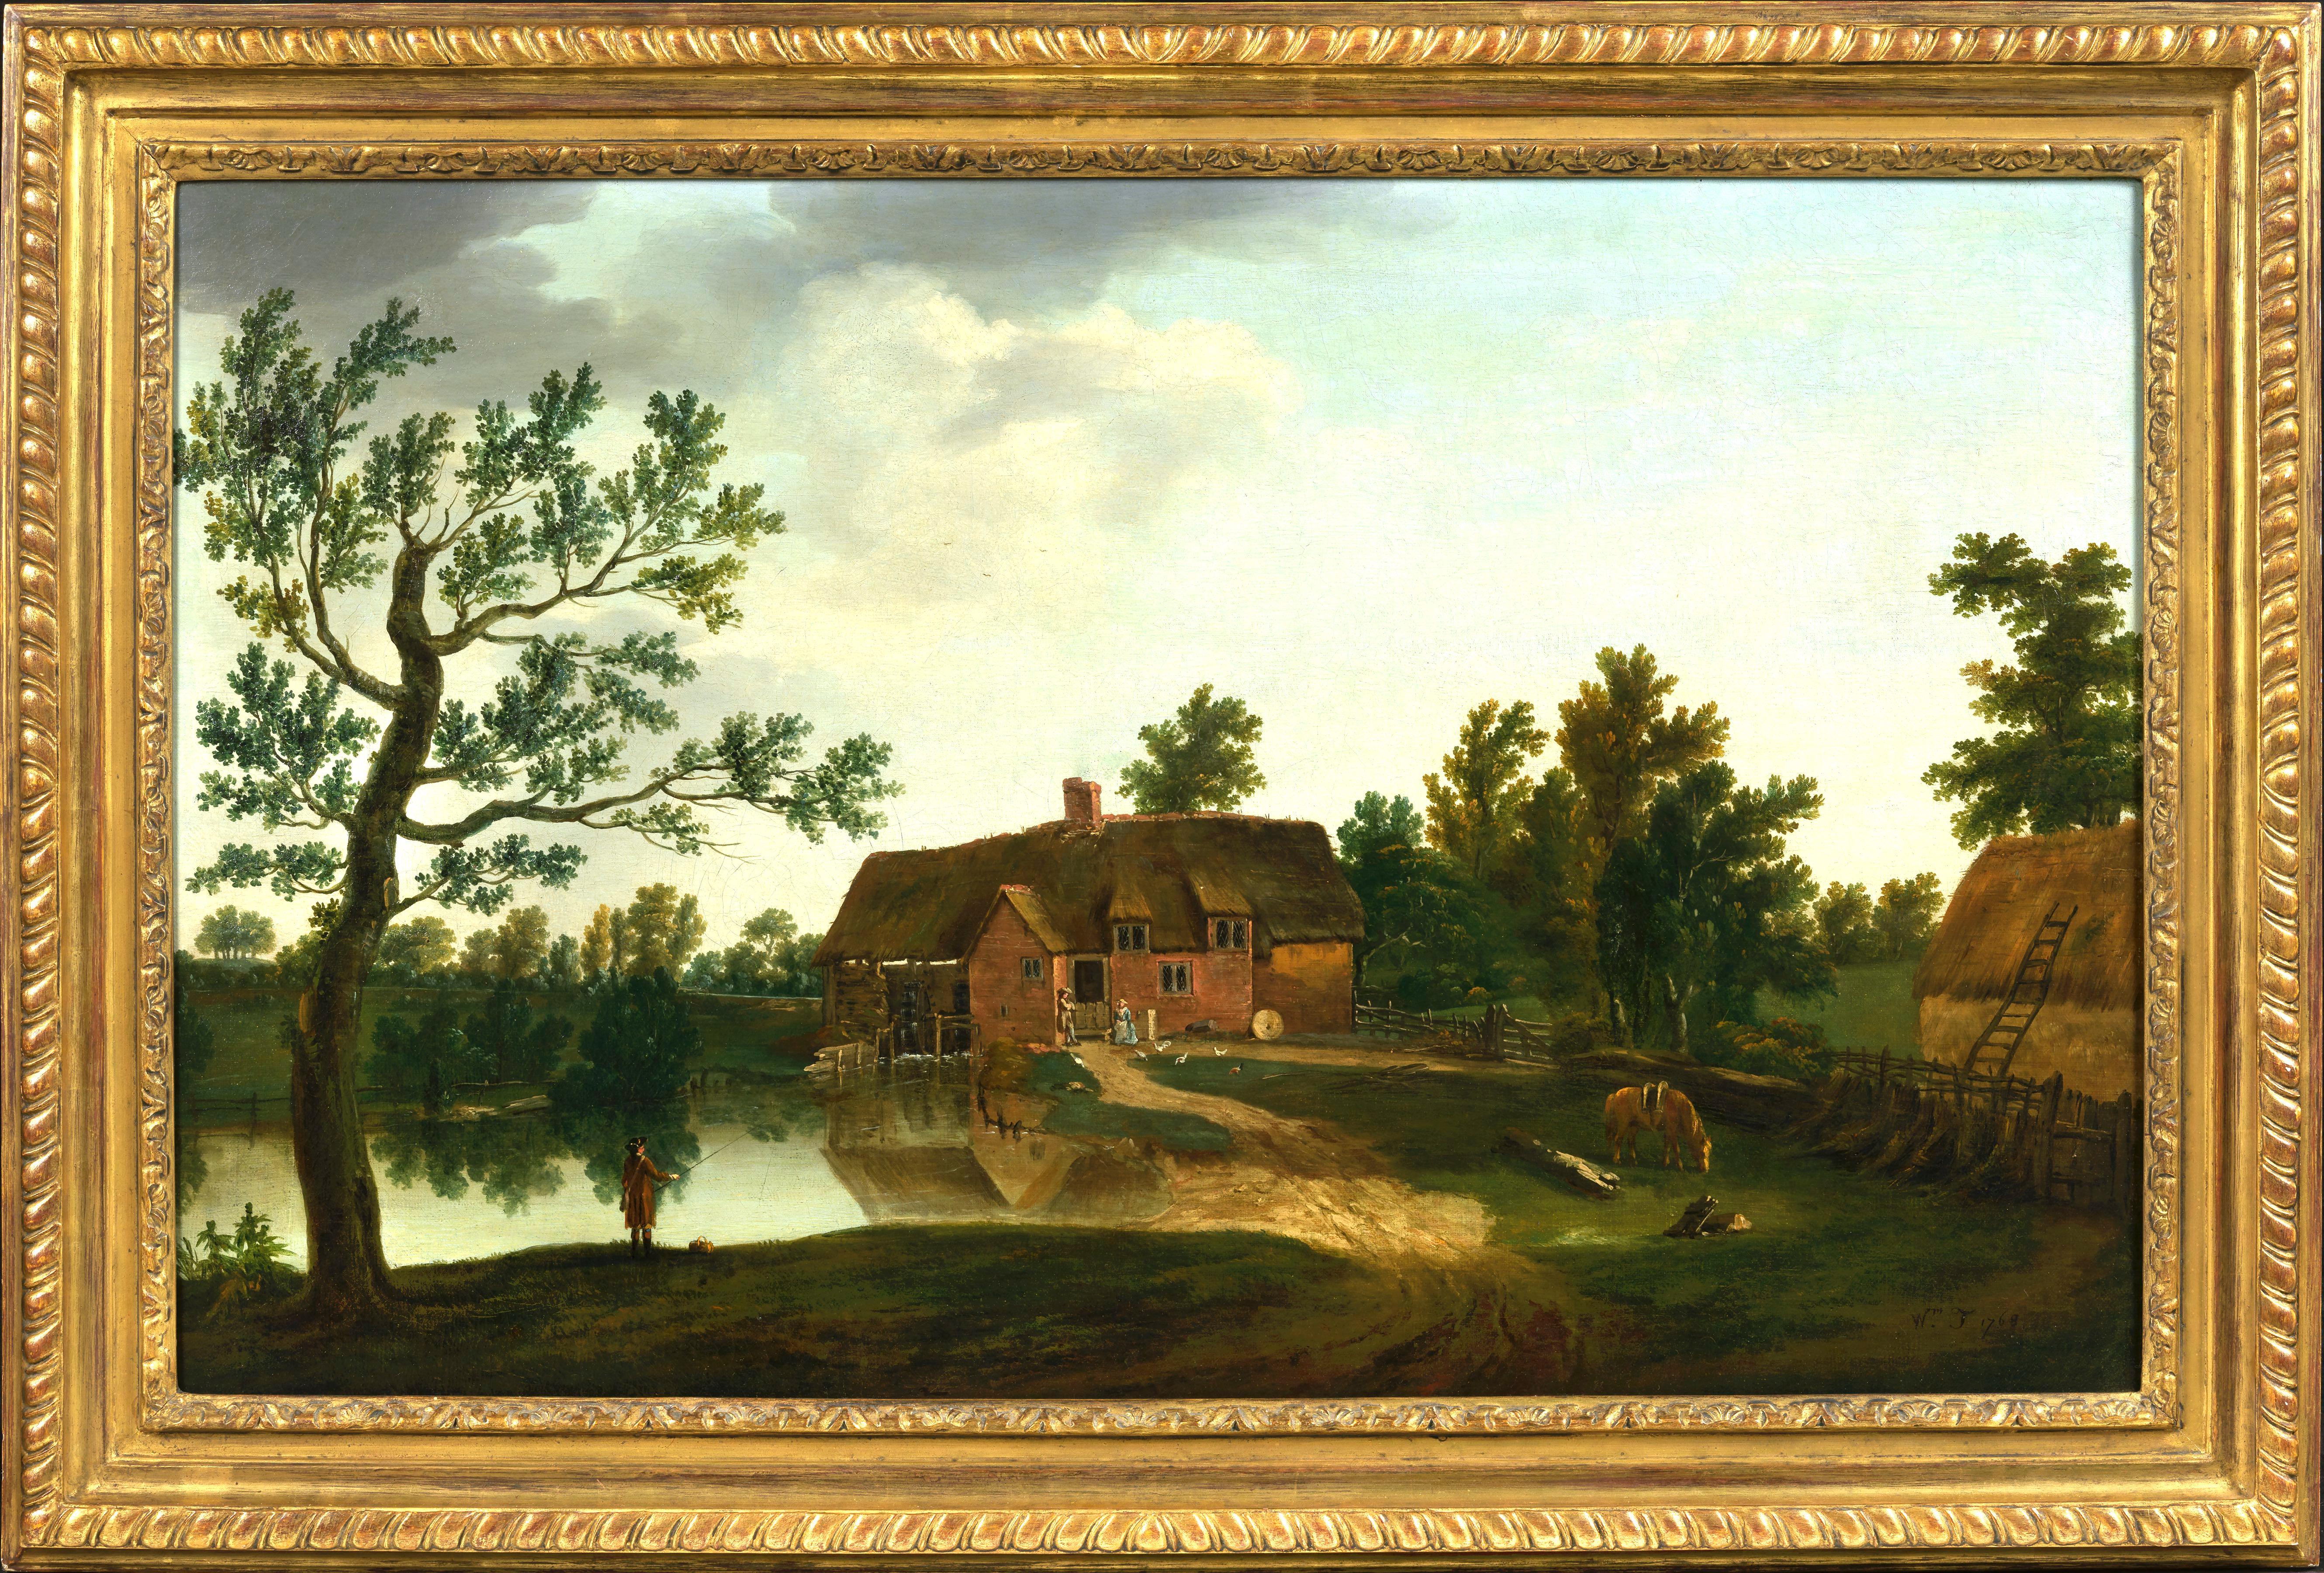 William Tomkins Landscape Painting - A view of Chamberlain's Mill at Bere Regis, Dorset